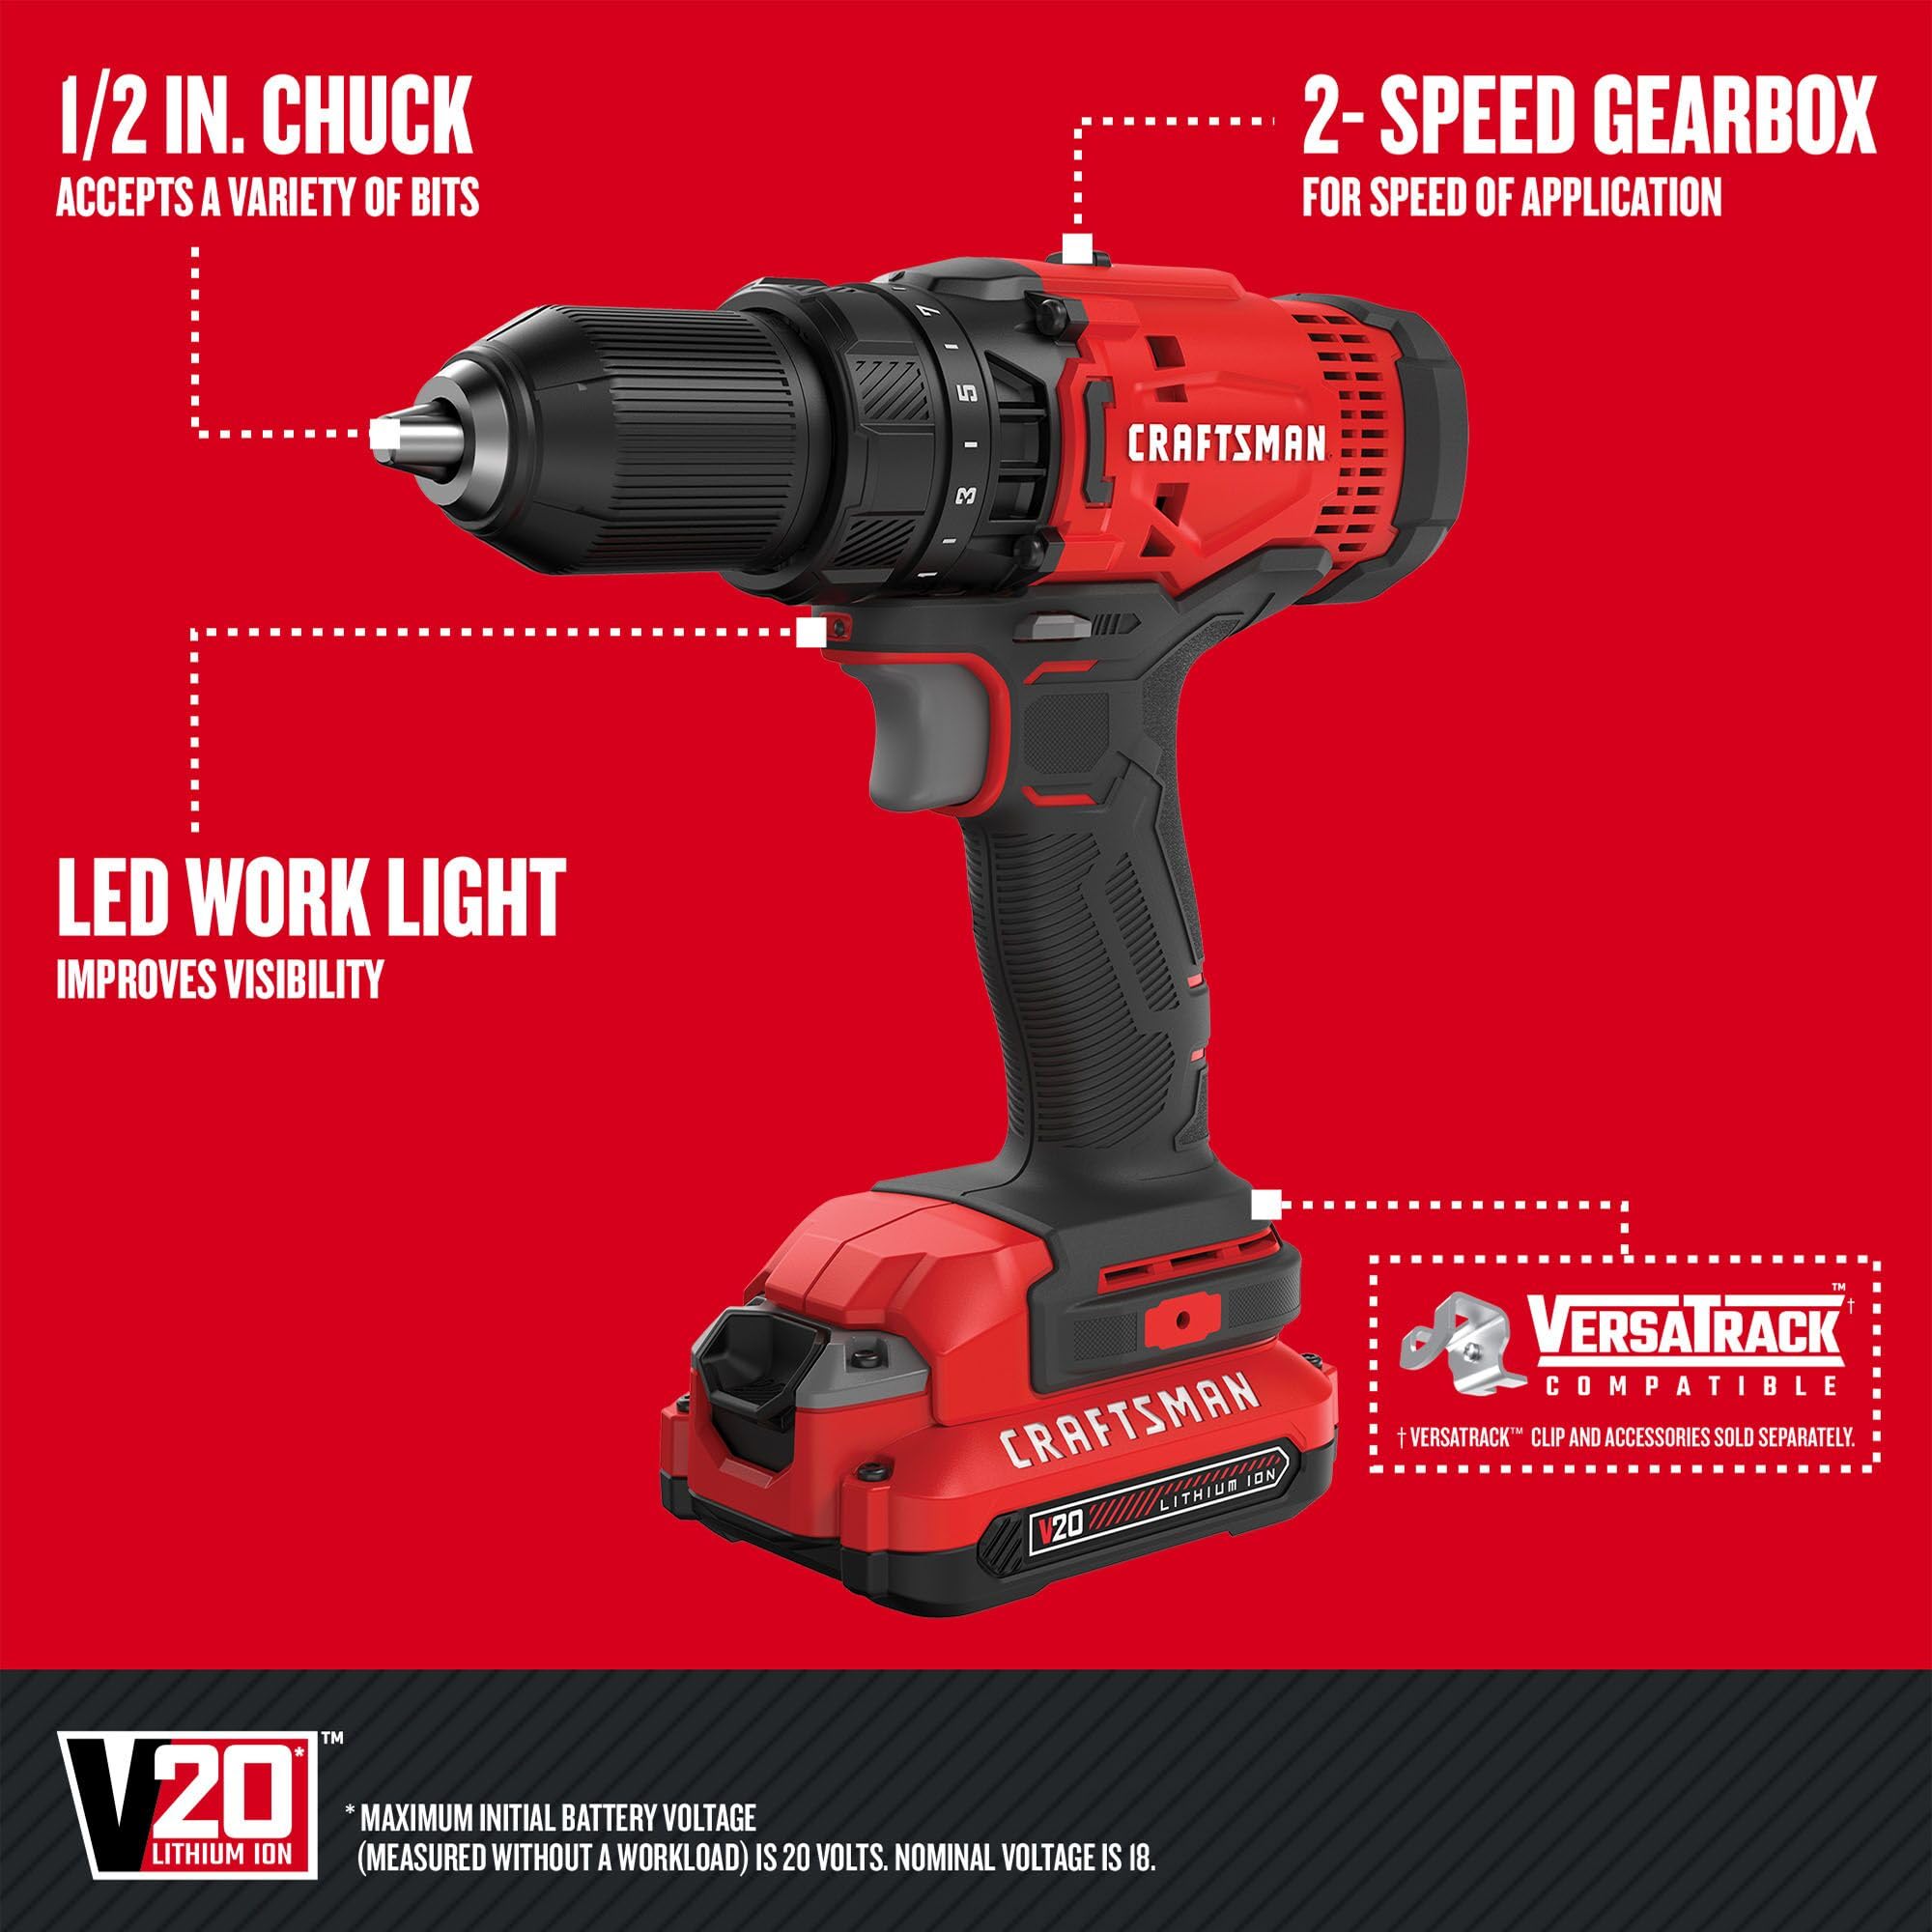 CRAFTSMAN V20 MAX Cordless Drill and Impact Driver, Power Tool Combo Kit with 2 Batteries and Charger (CMCK200C2AM),Black/Red